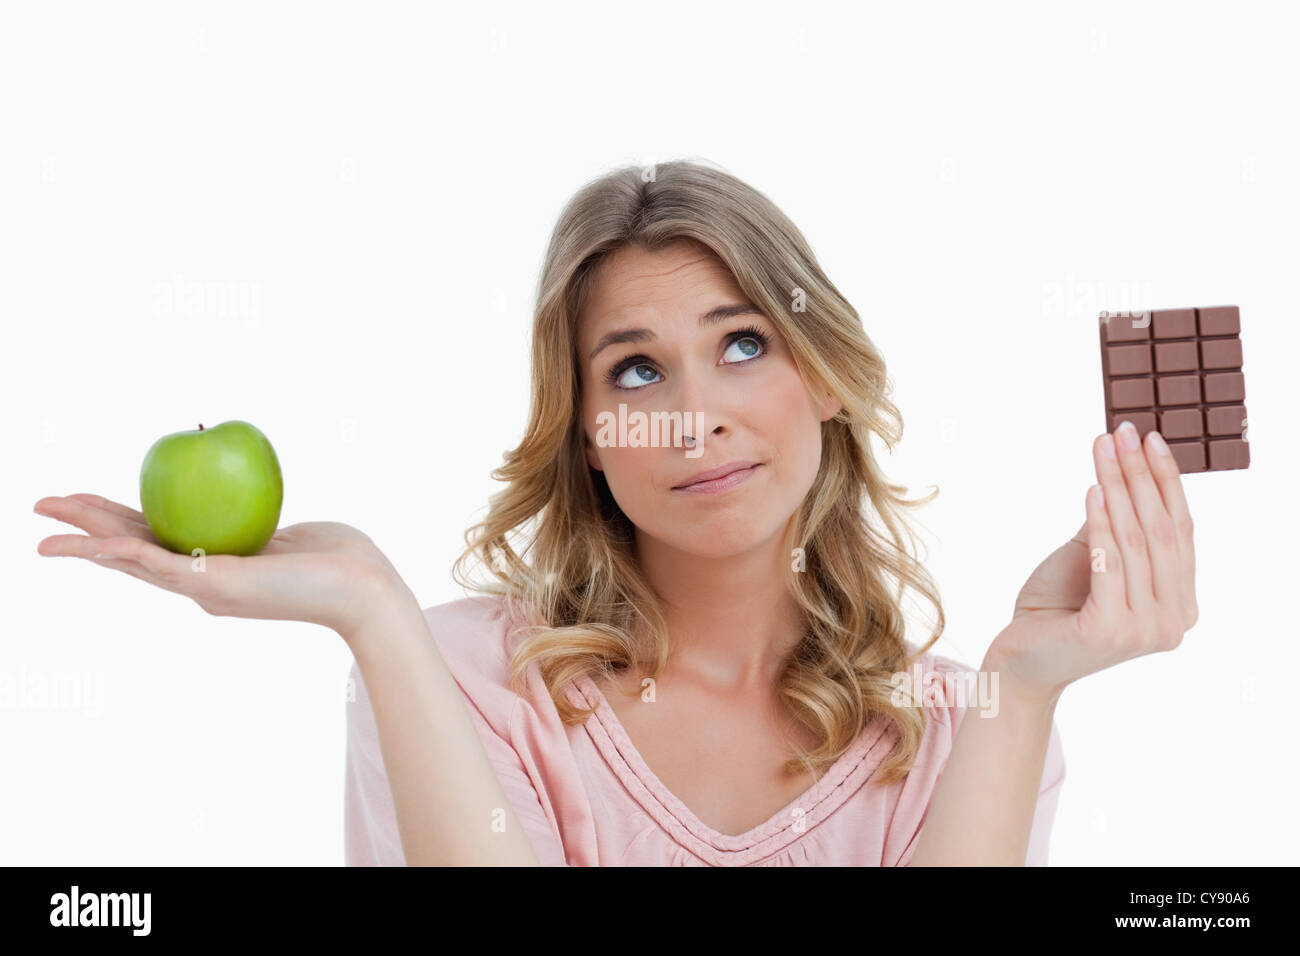 Thoughtful young woman making a decision Stock Photo